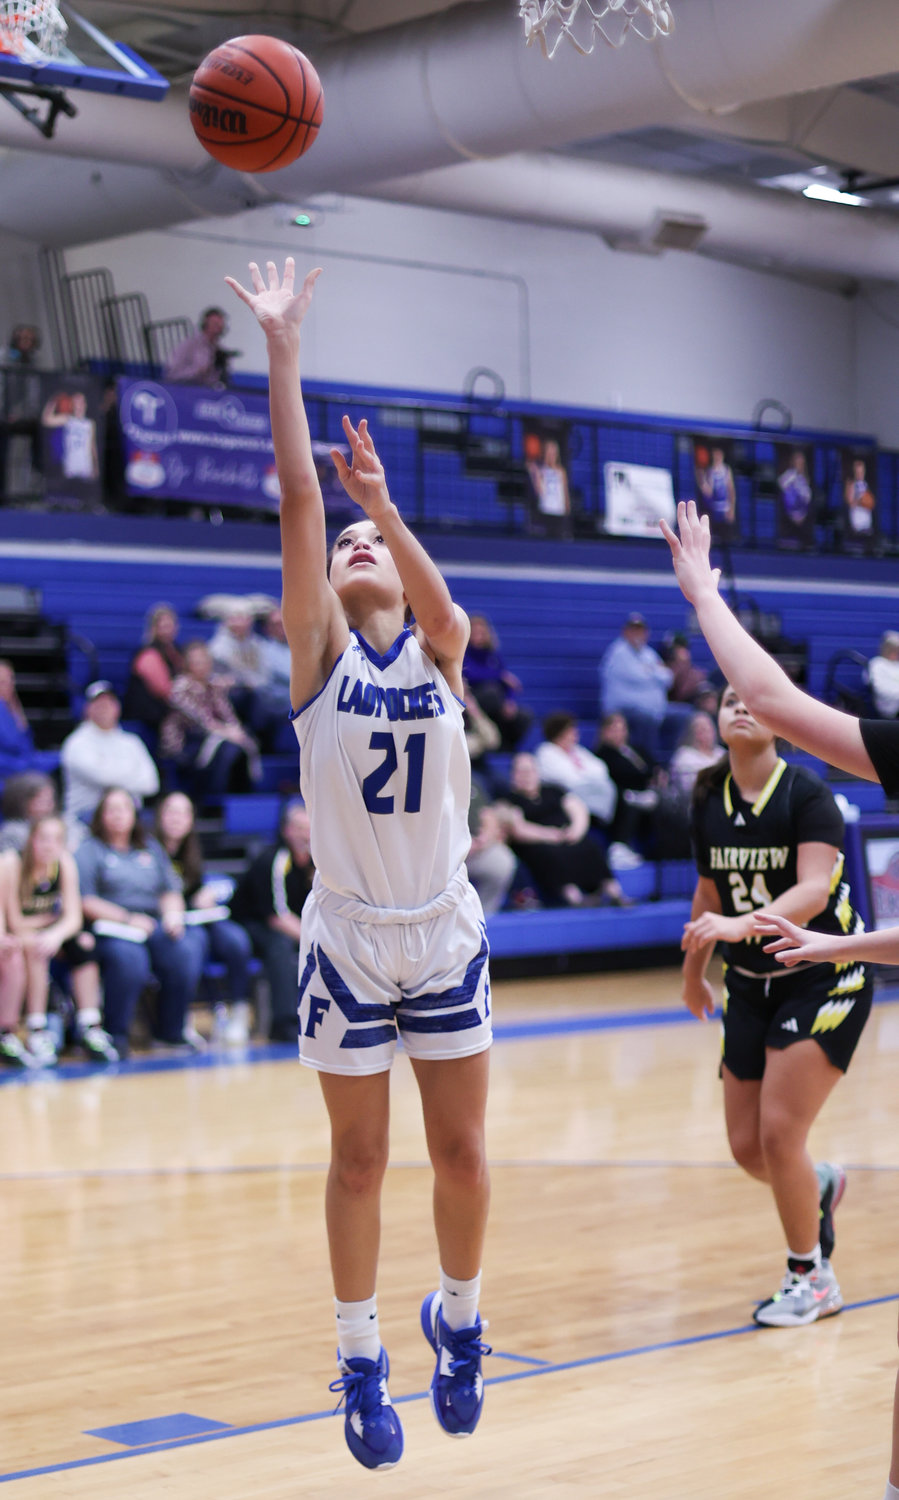 Kaylin Pope goes in for the layup. She put up 11 points, along with Megan Mealer, in the win on Tuesday.